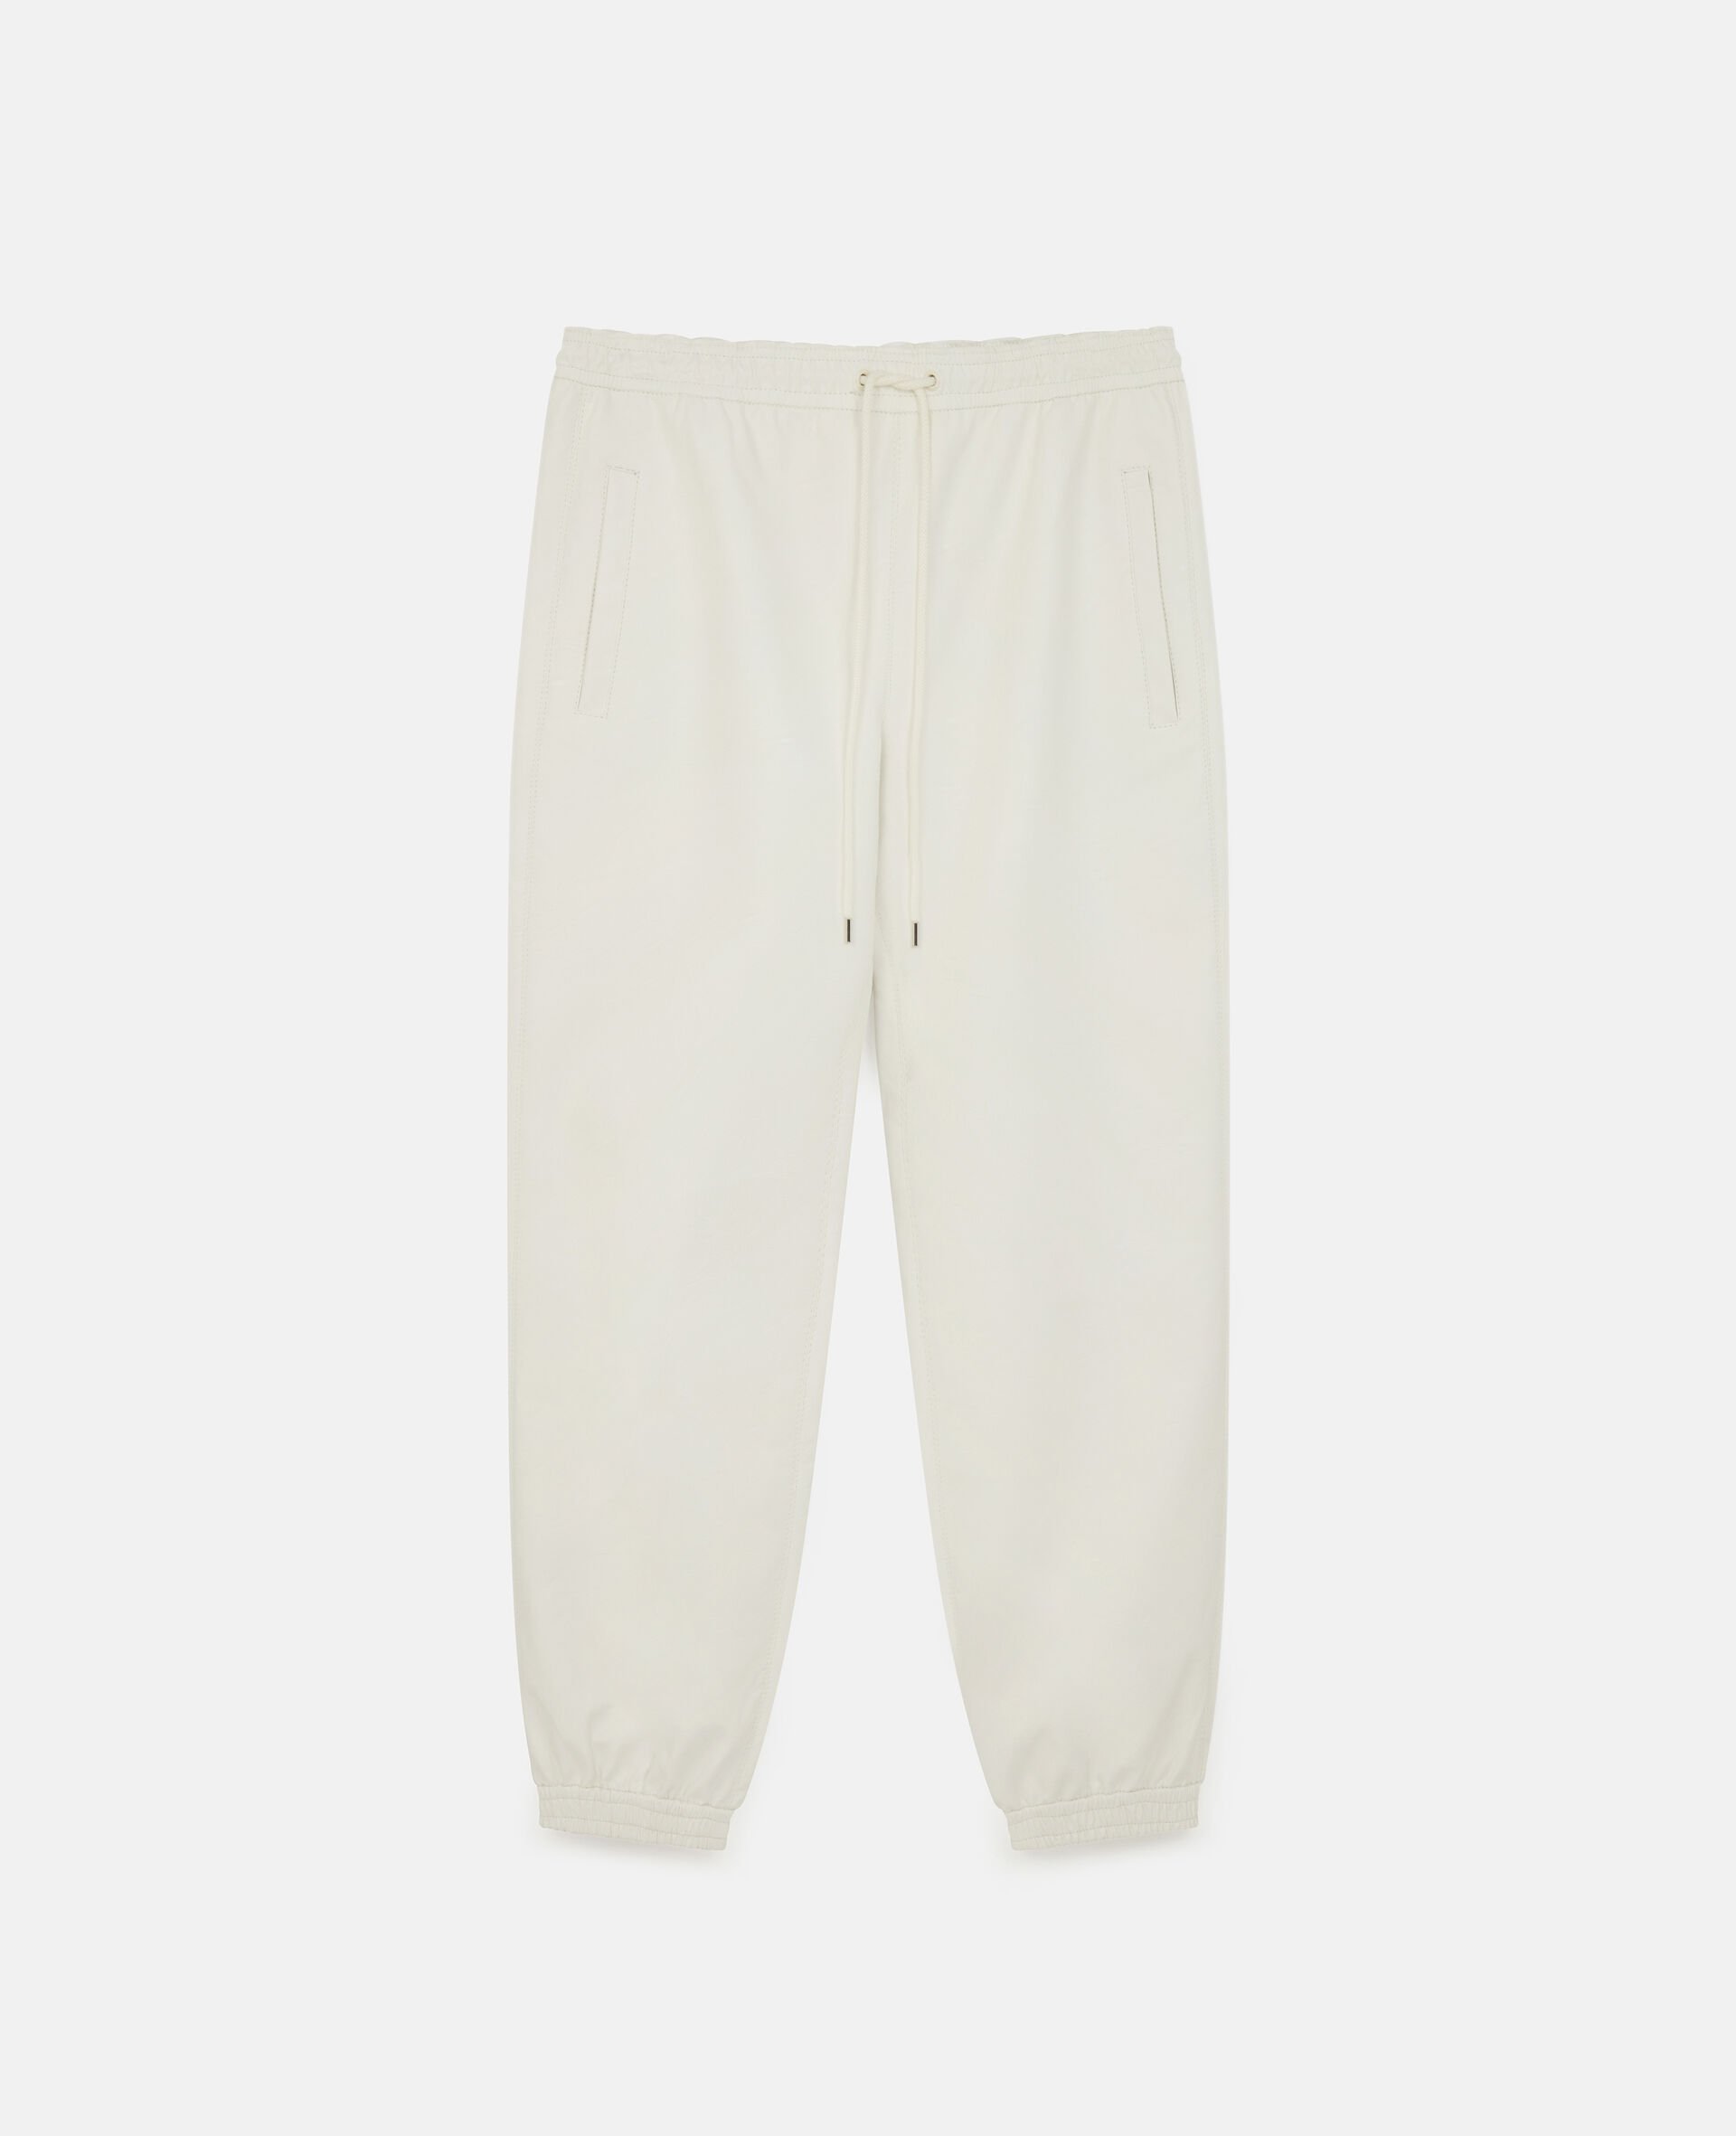 Alter Mat Trousers-White-large image number 0